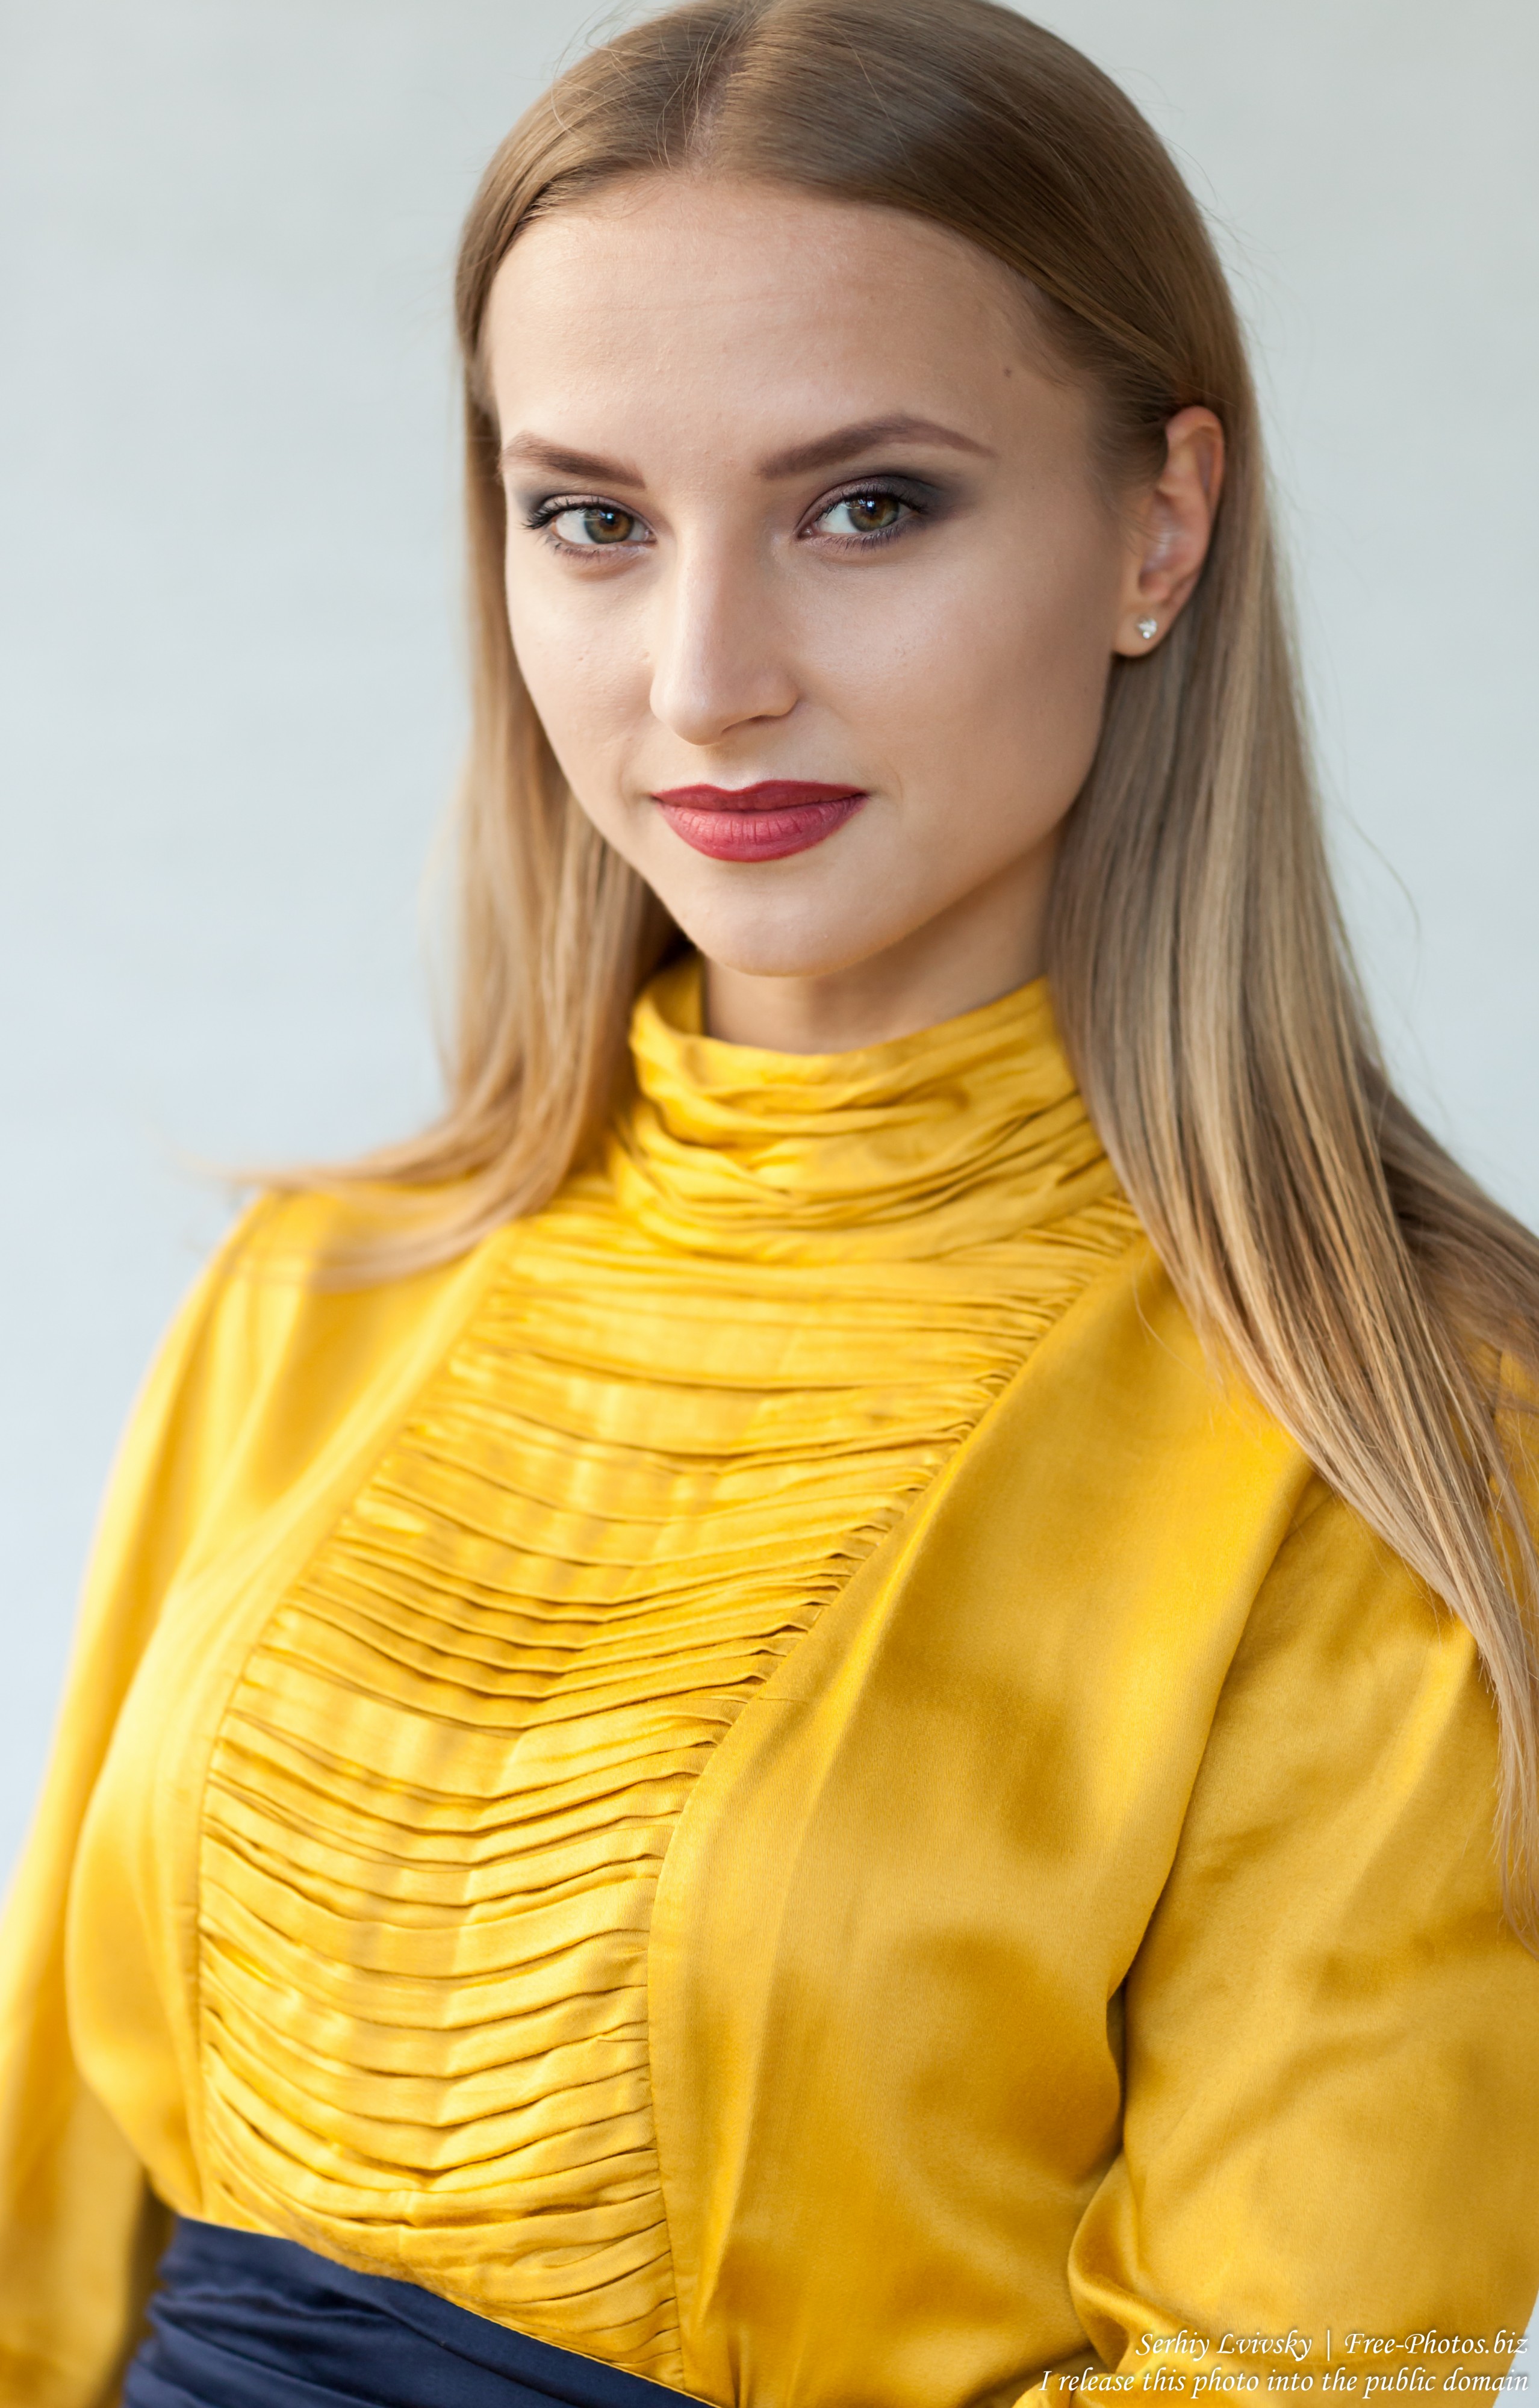 Marta - a 21-year-old blonde creation of God photographed by Serhiy Lvivsky in August 2017, picture 3